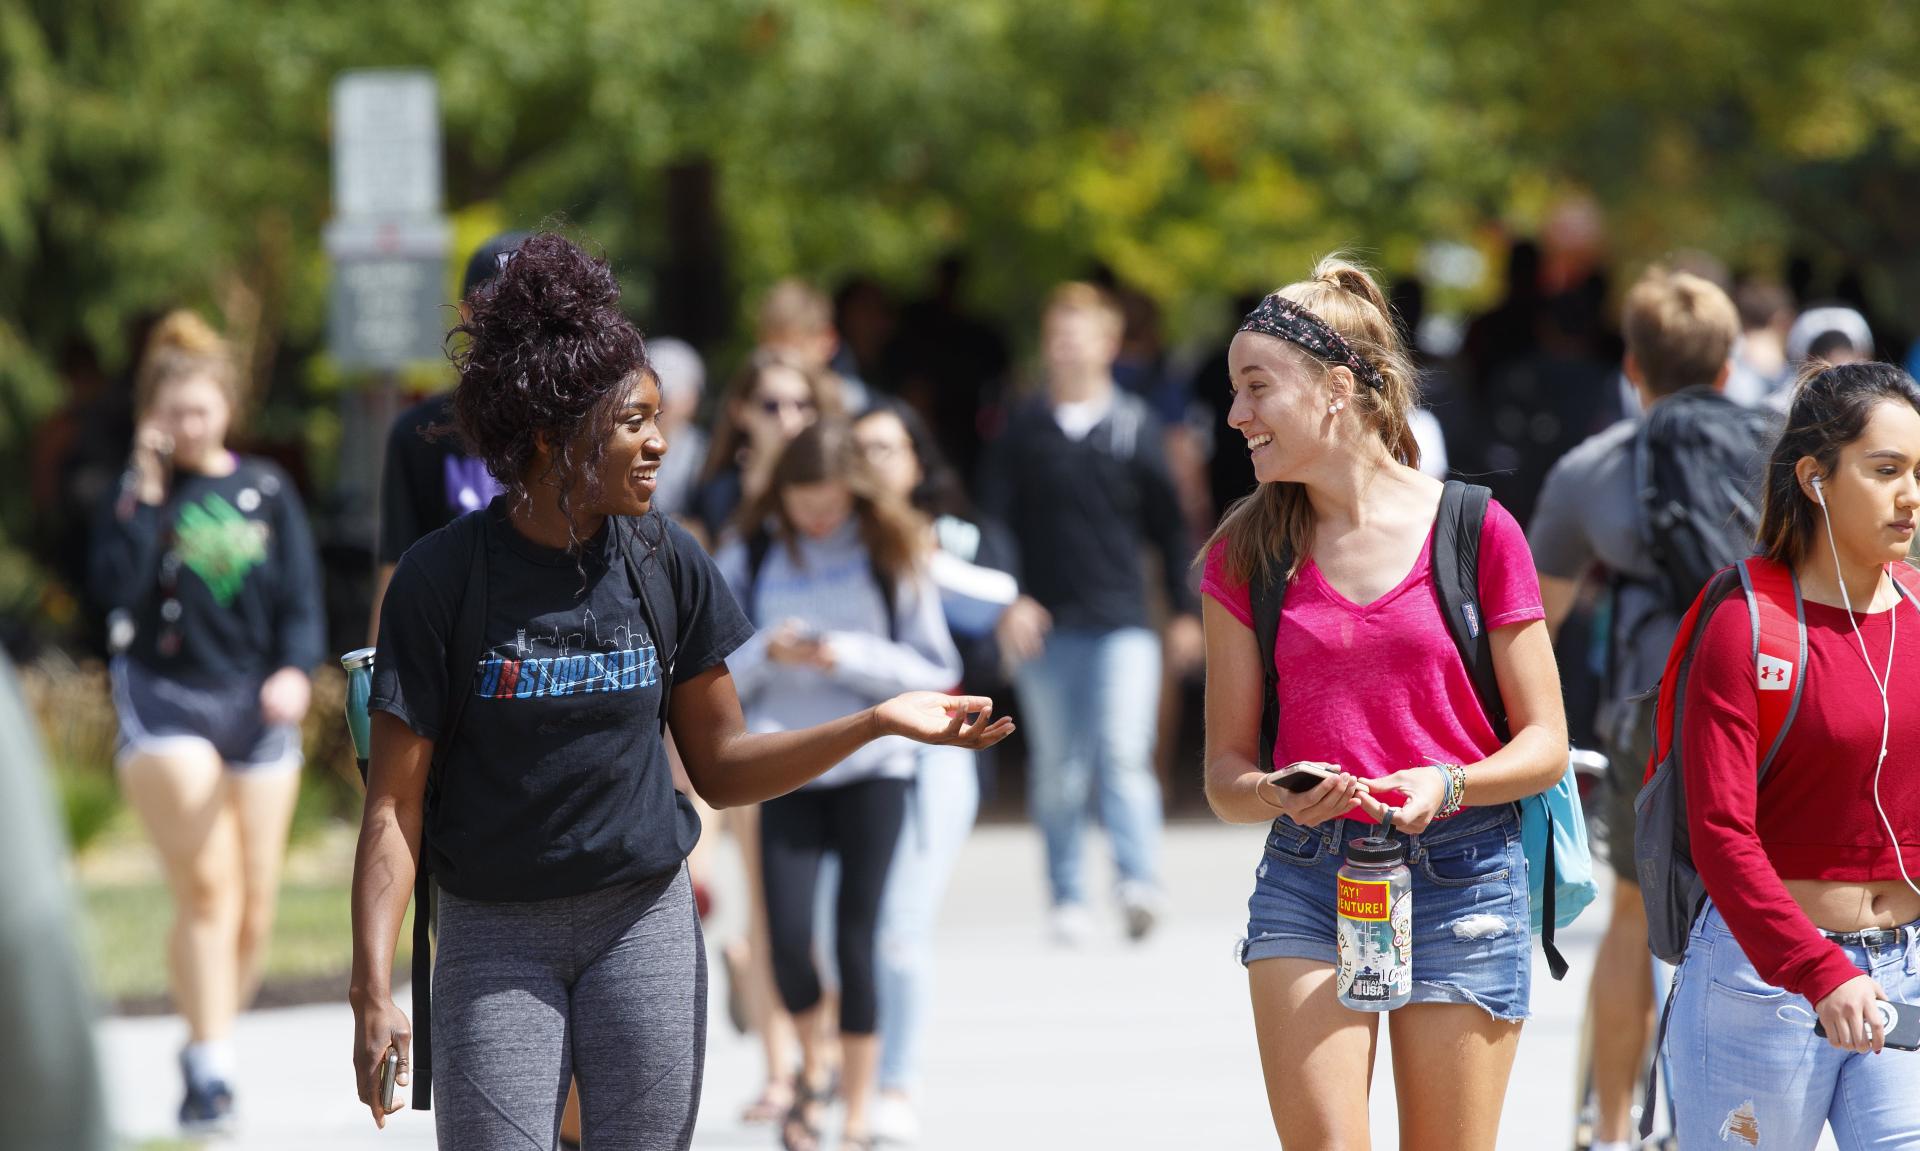 Students walk and laugh on campus